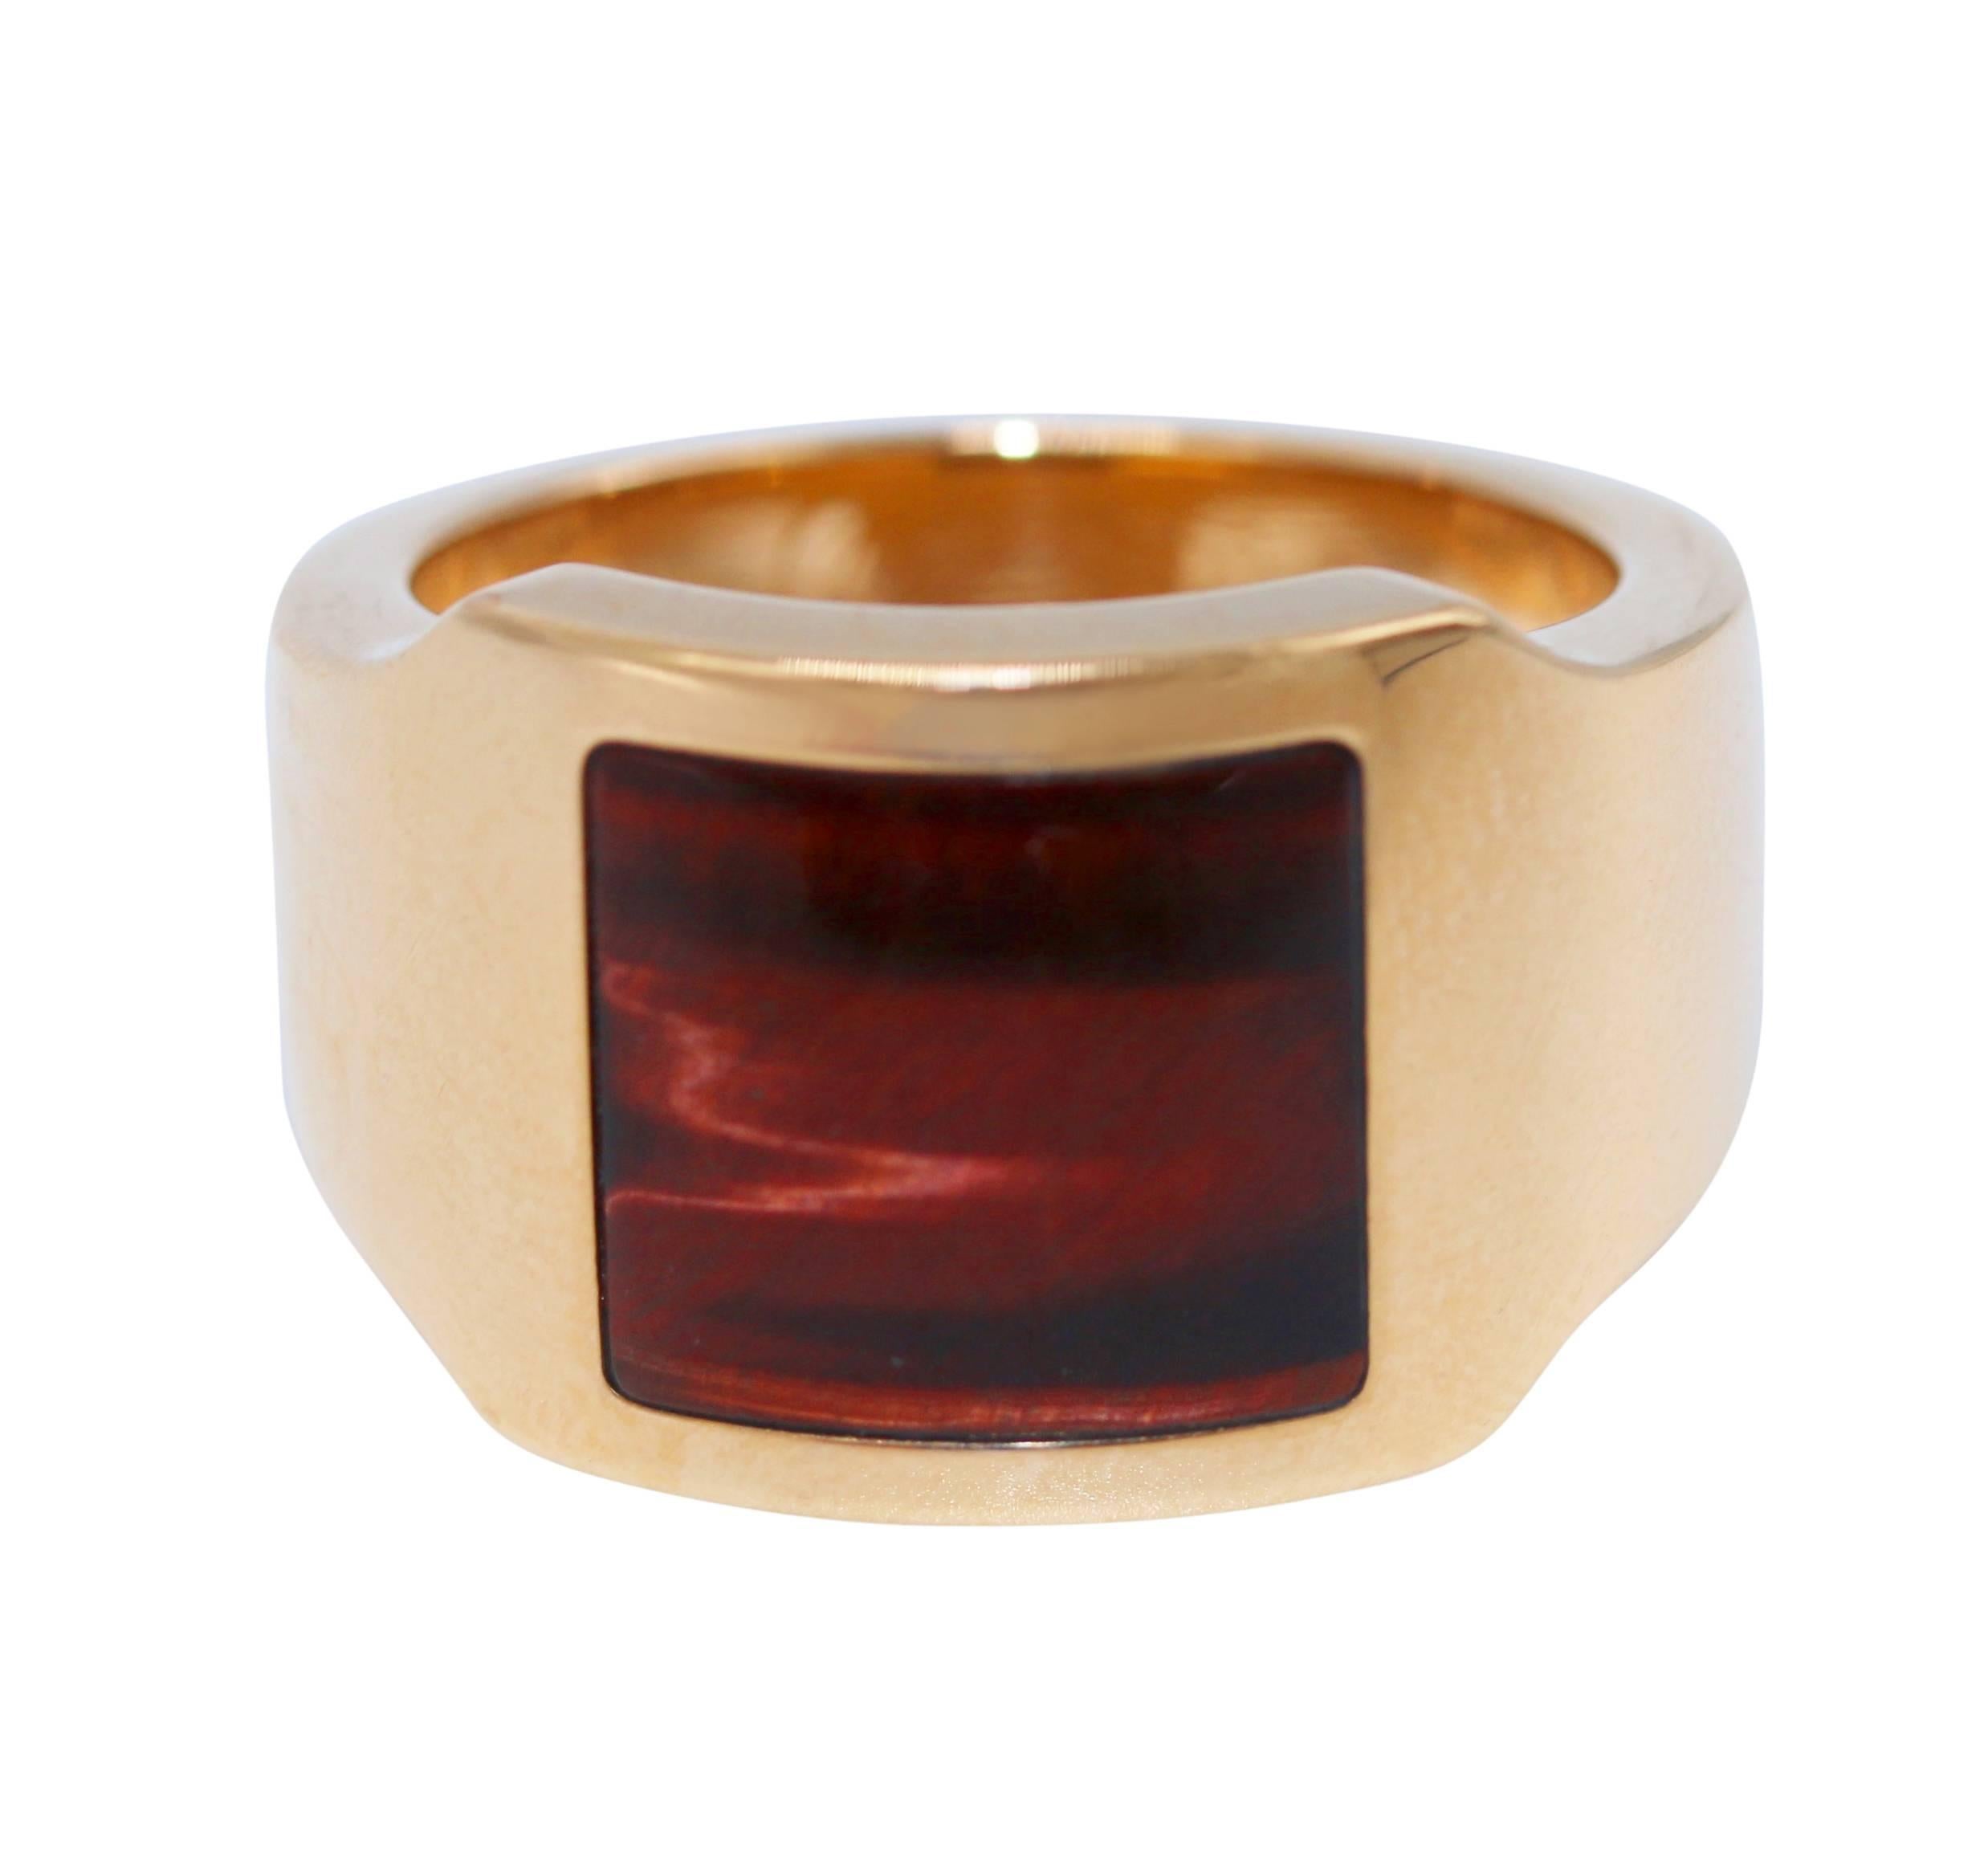 Cartier Tiger's Eye and Gold Men's Ring